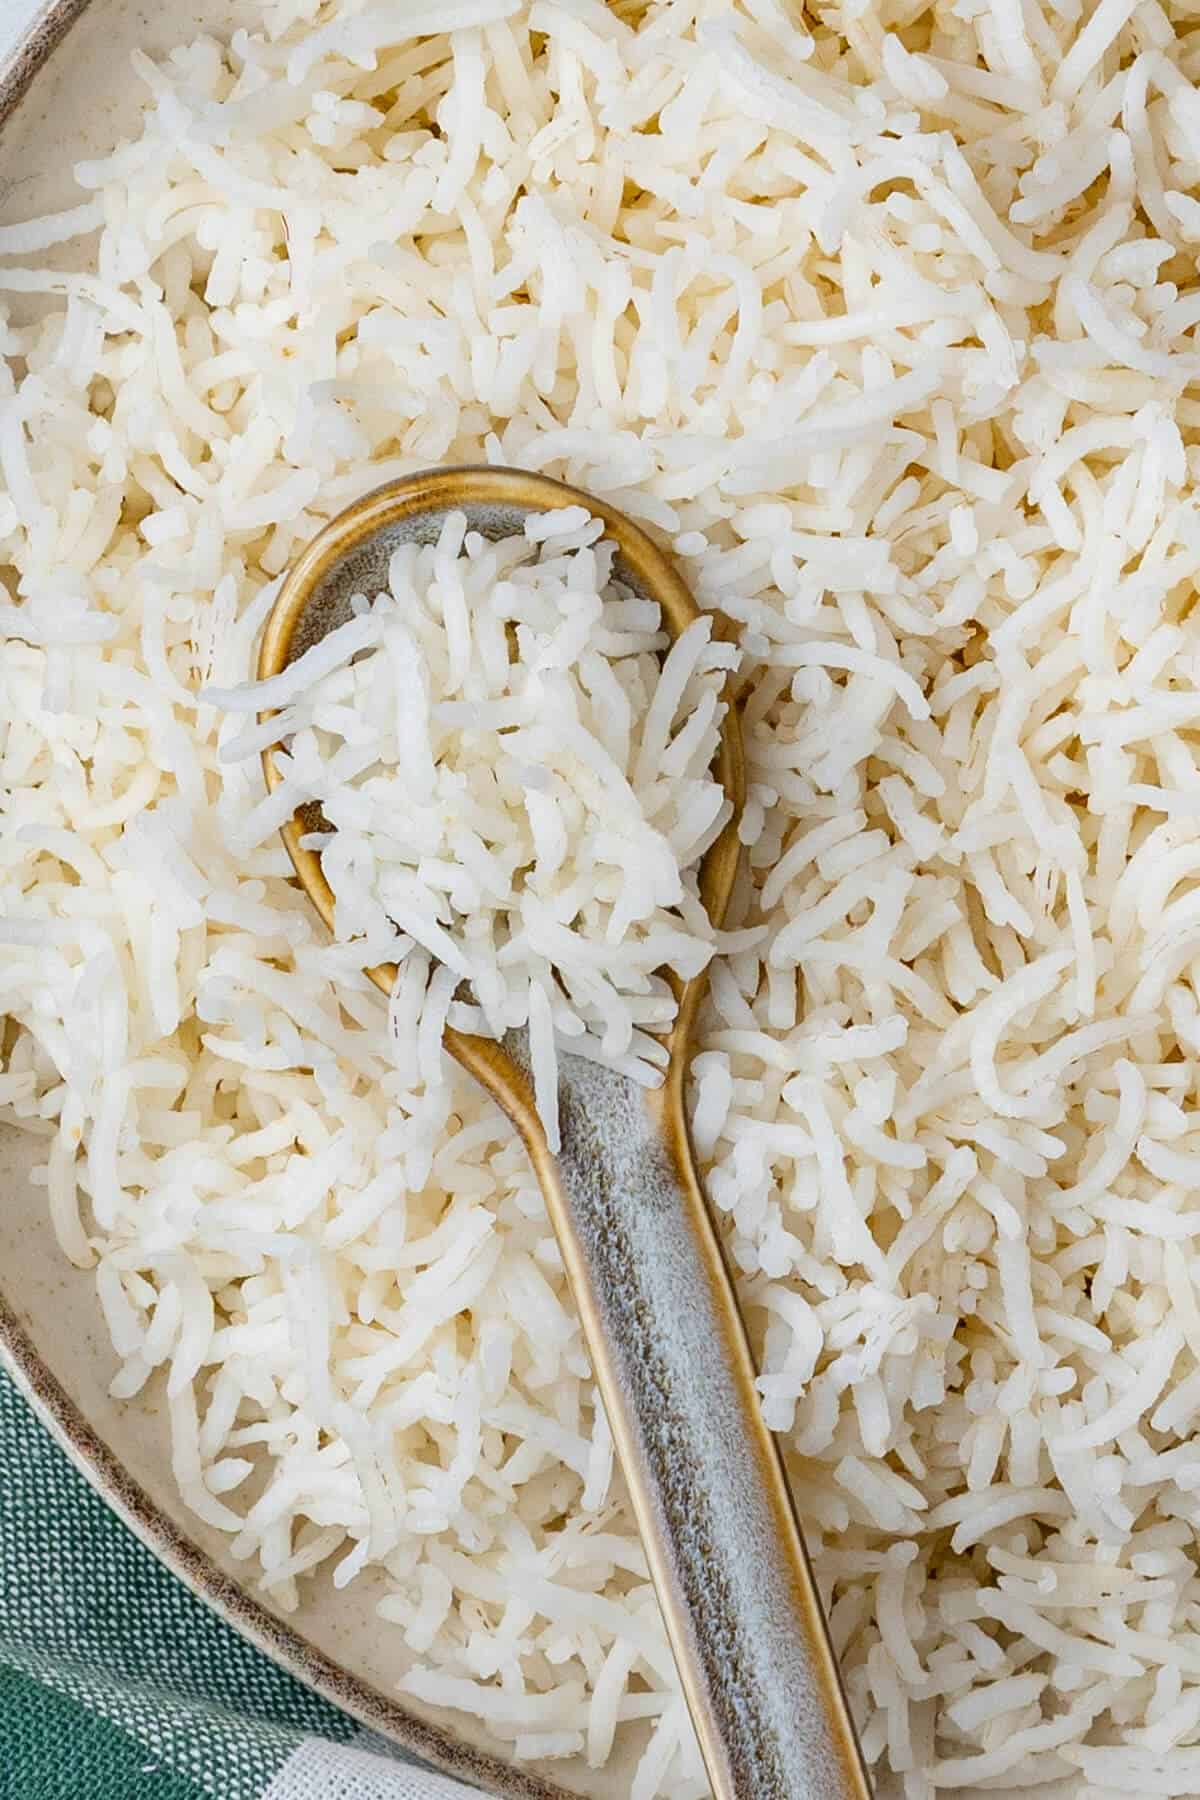 Spoon in a bowl of basmati rice